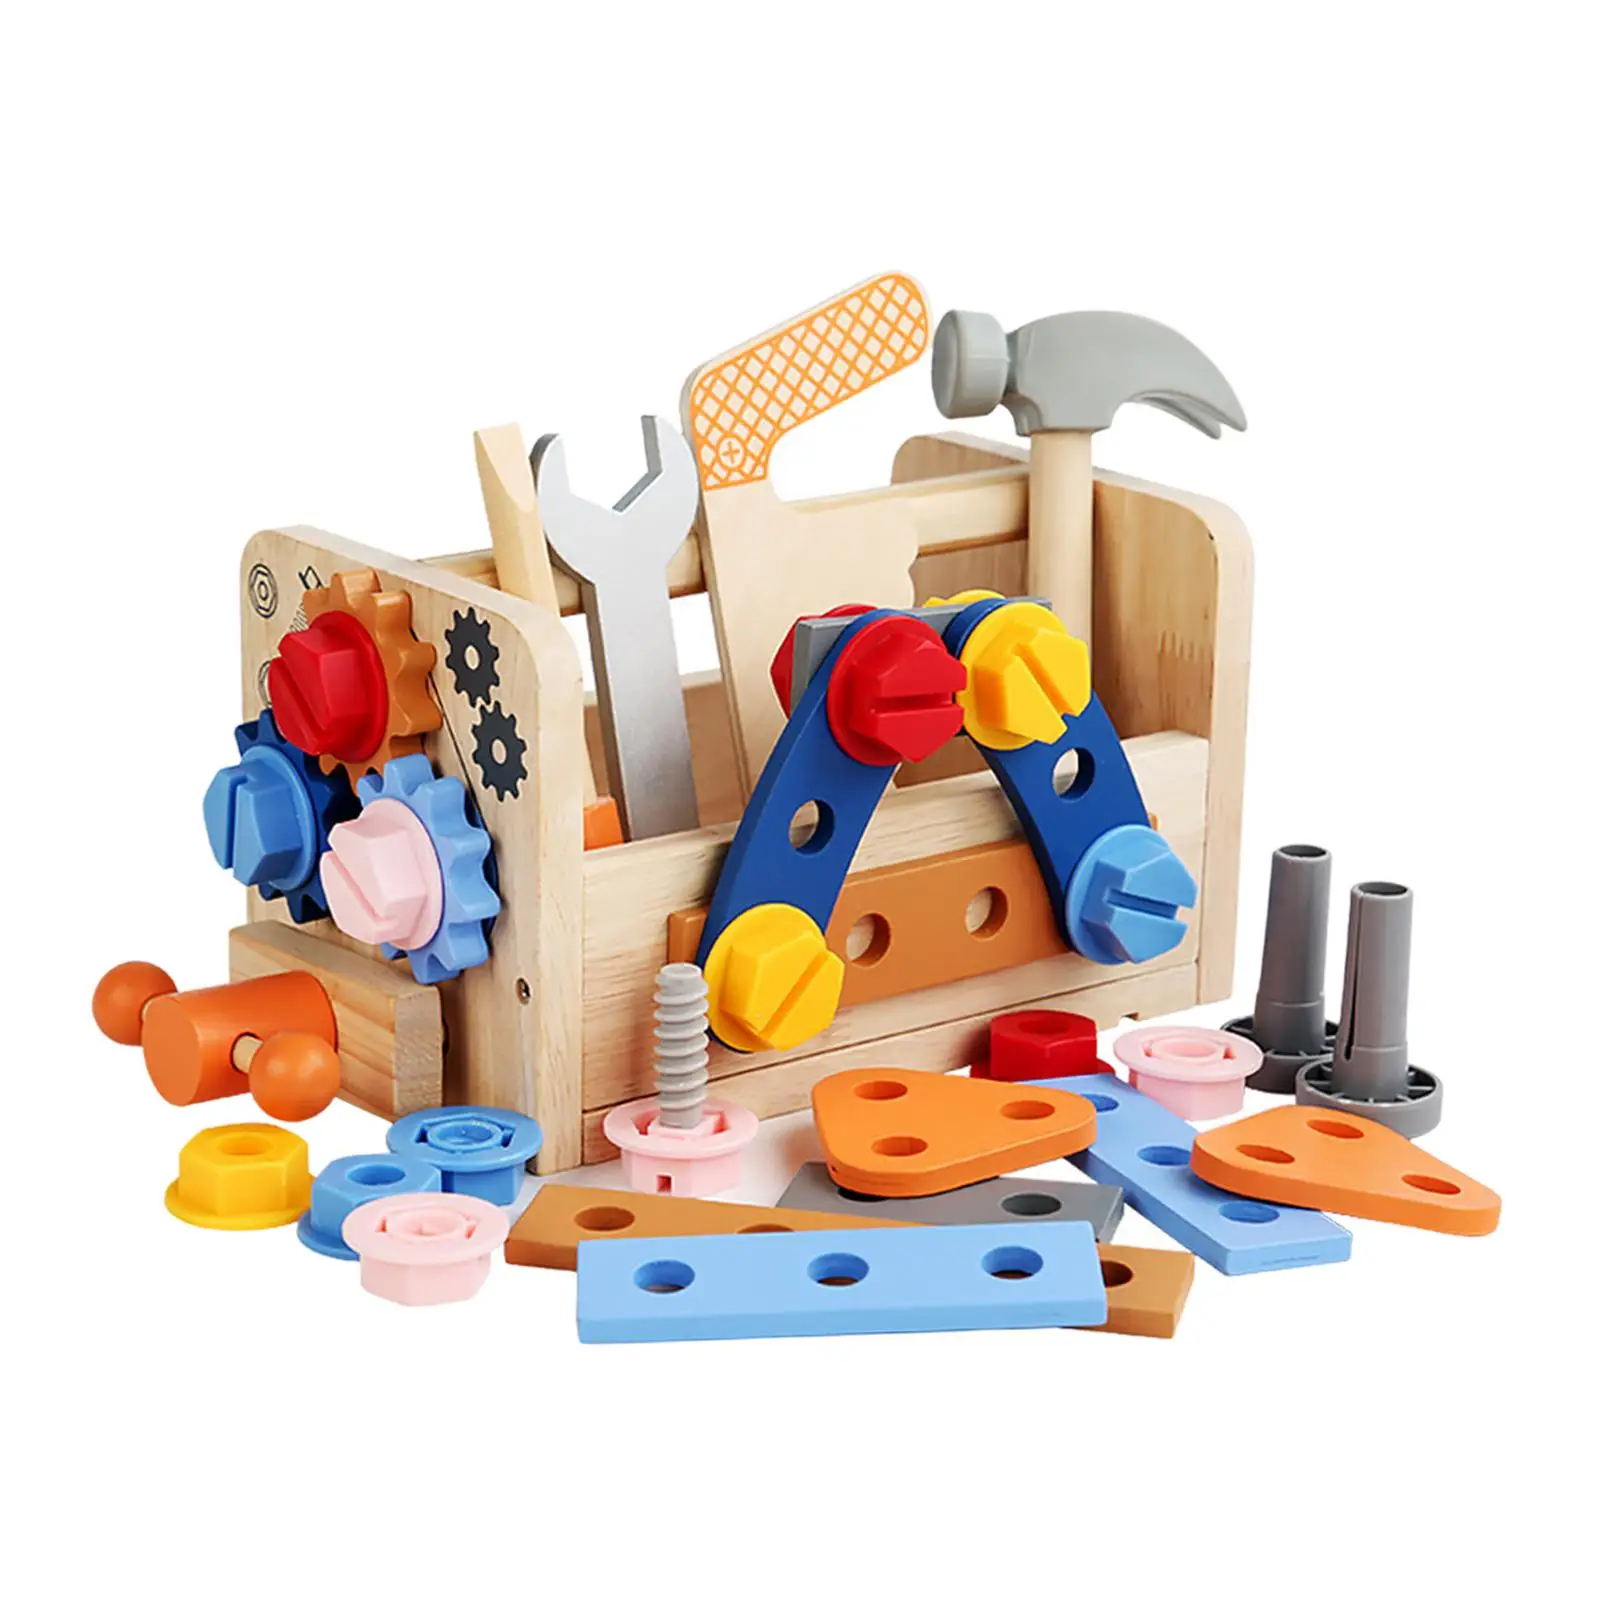 Toolbox Toy Construction Toy for kids Ages 3 4 5 6 7 Years Old Boy